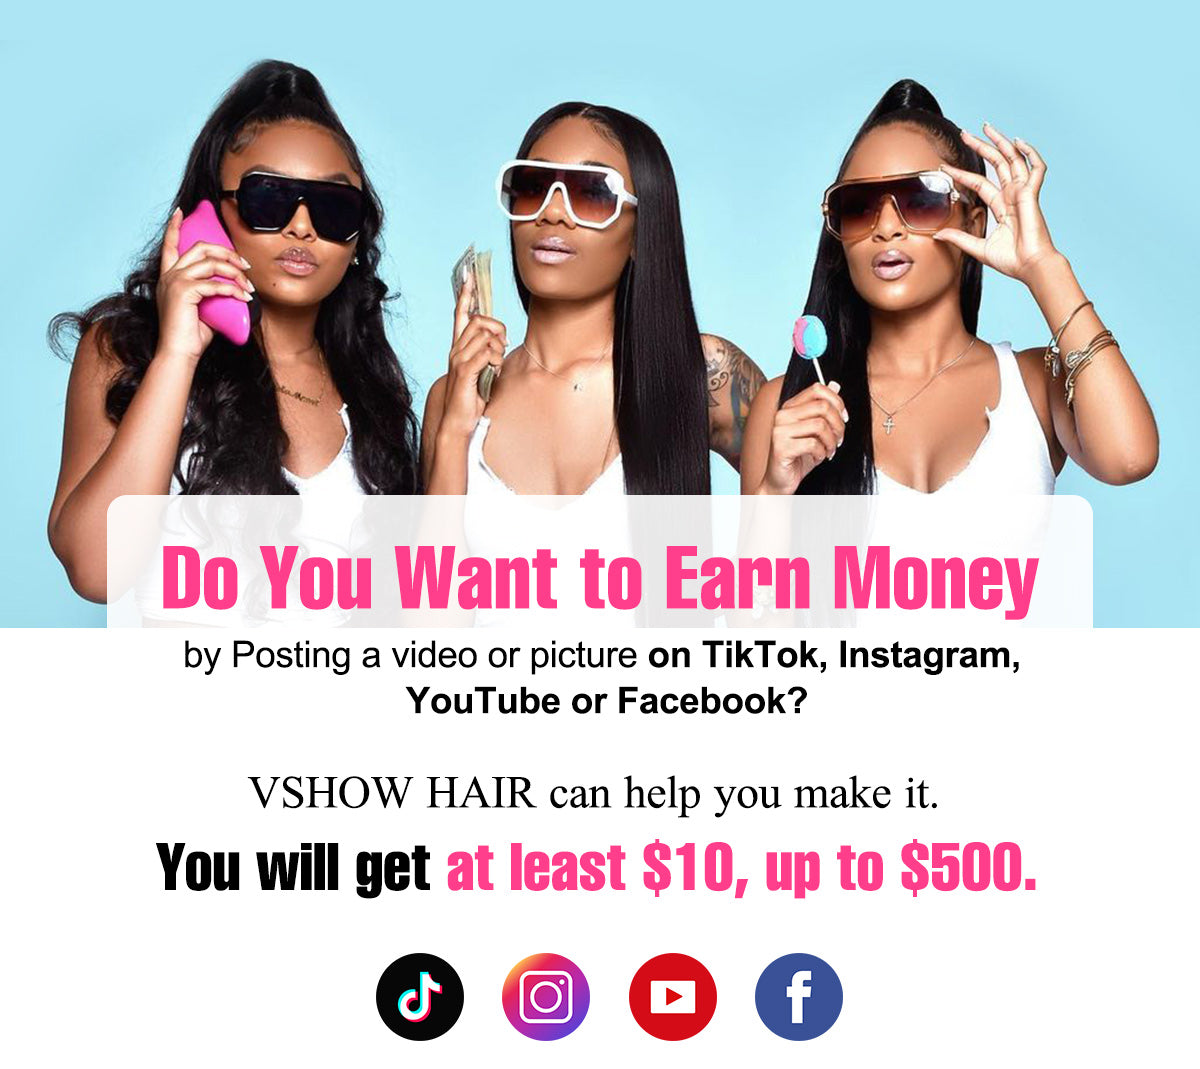 Do You Want to Earn Money by Posting a video or picture on TikTok, Instagram, YouTube or Facebook?